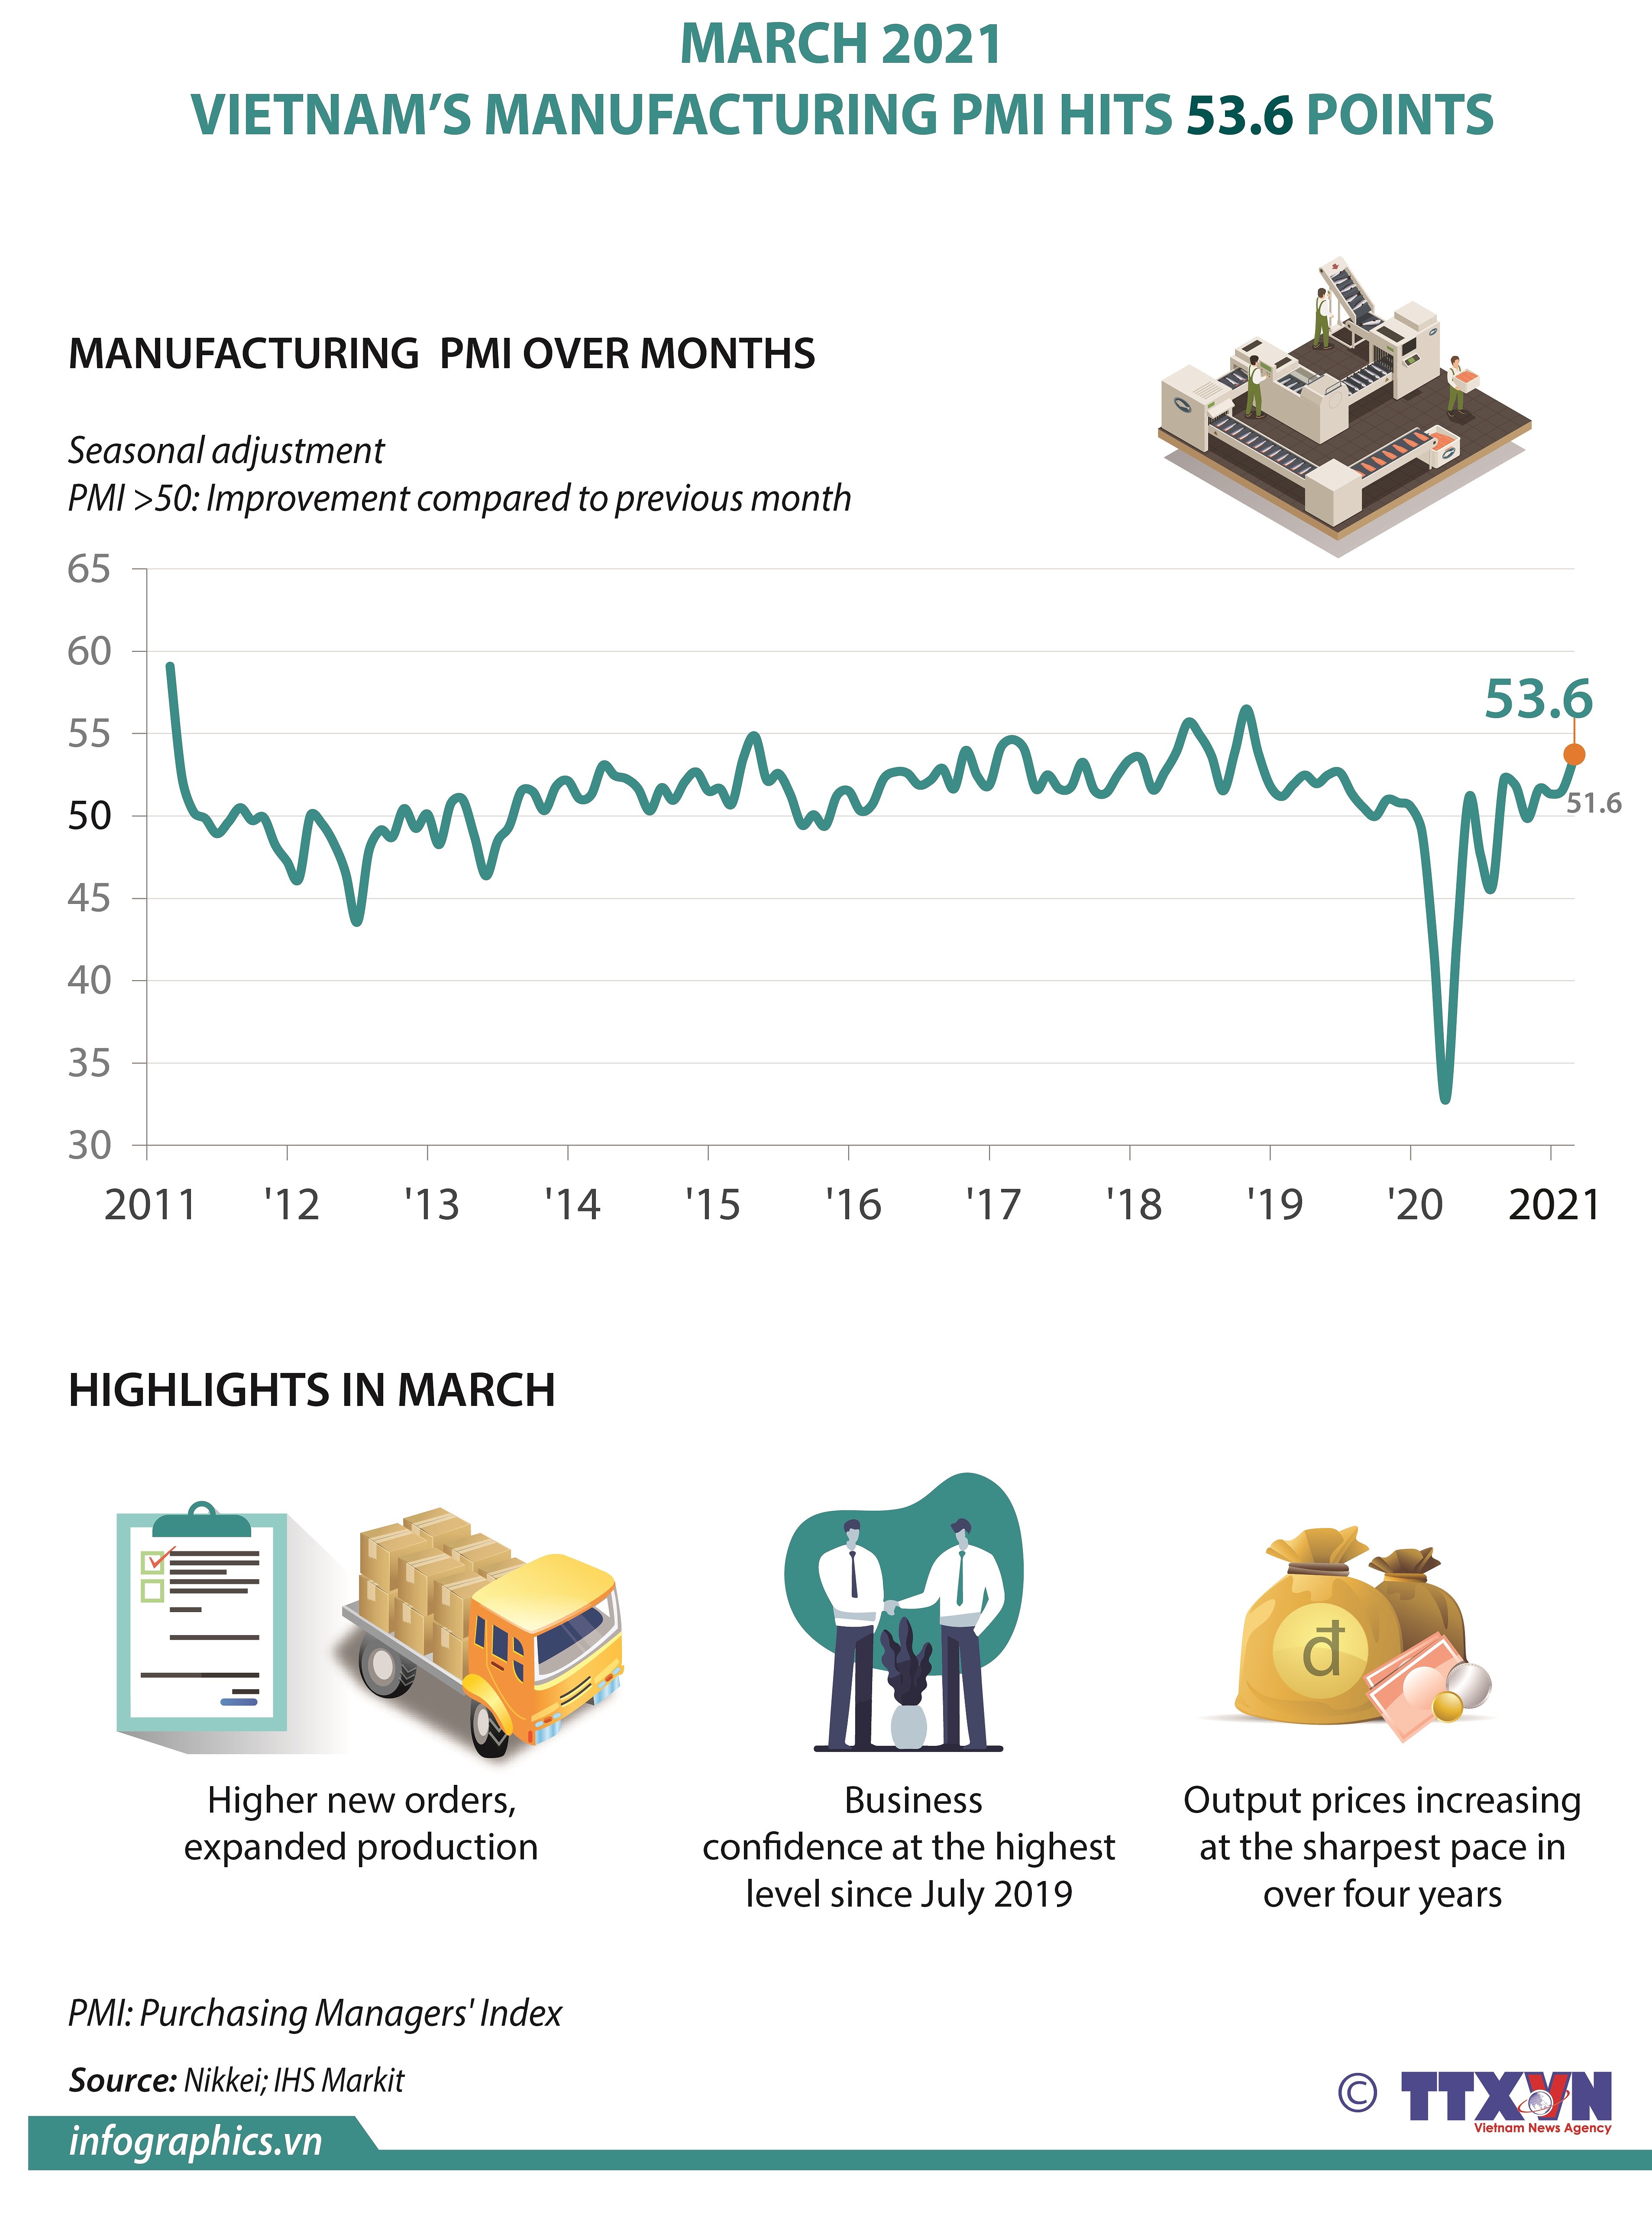 Vietnam's manufacturing PMI hits 53.6 points in March hinh anh 1